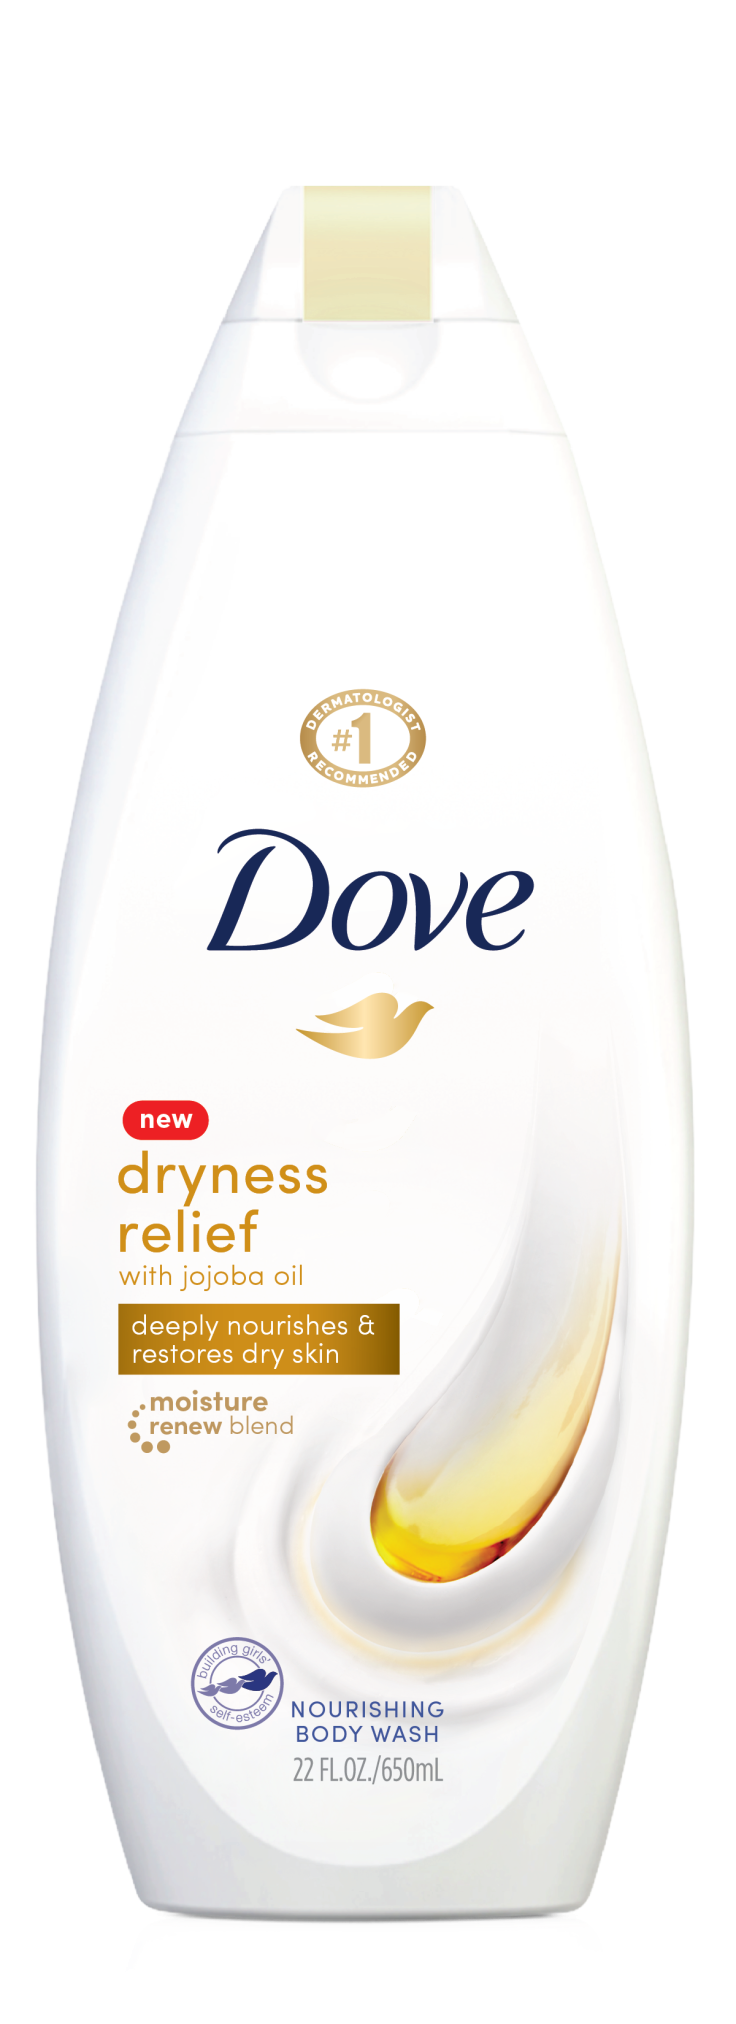 Dove Dryness Relief Body Wash